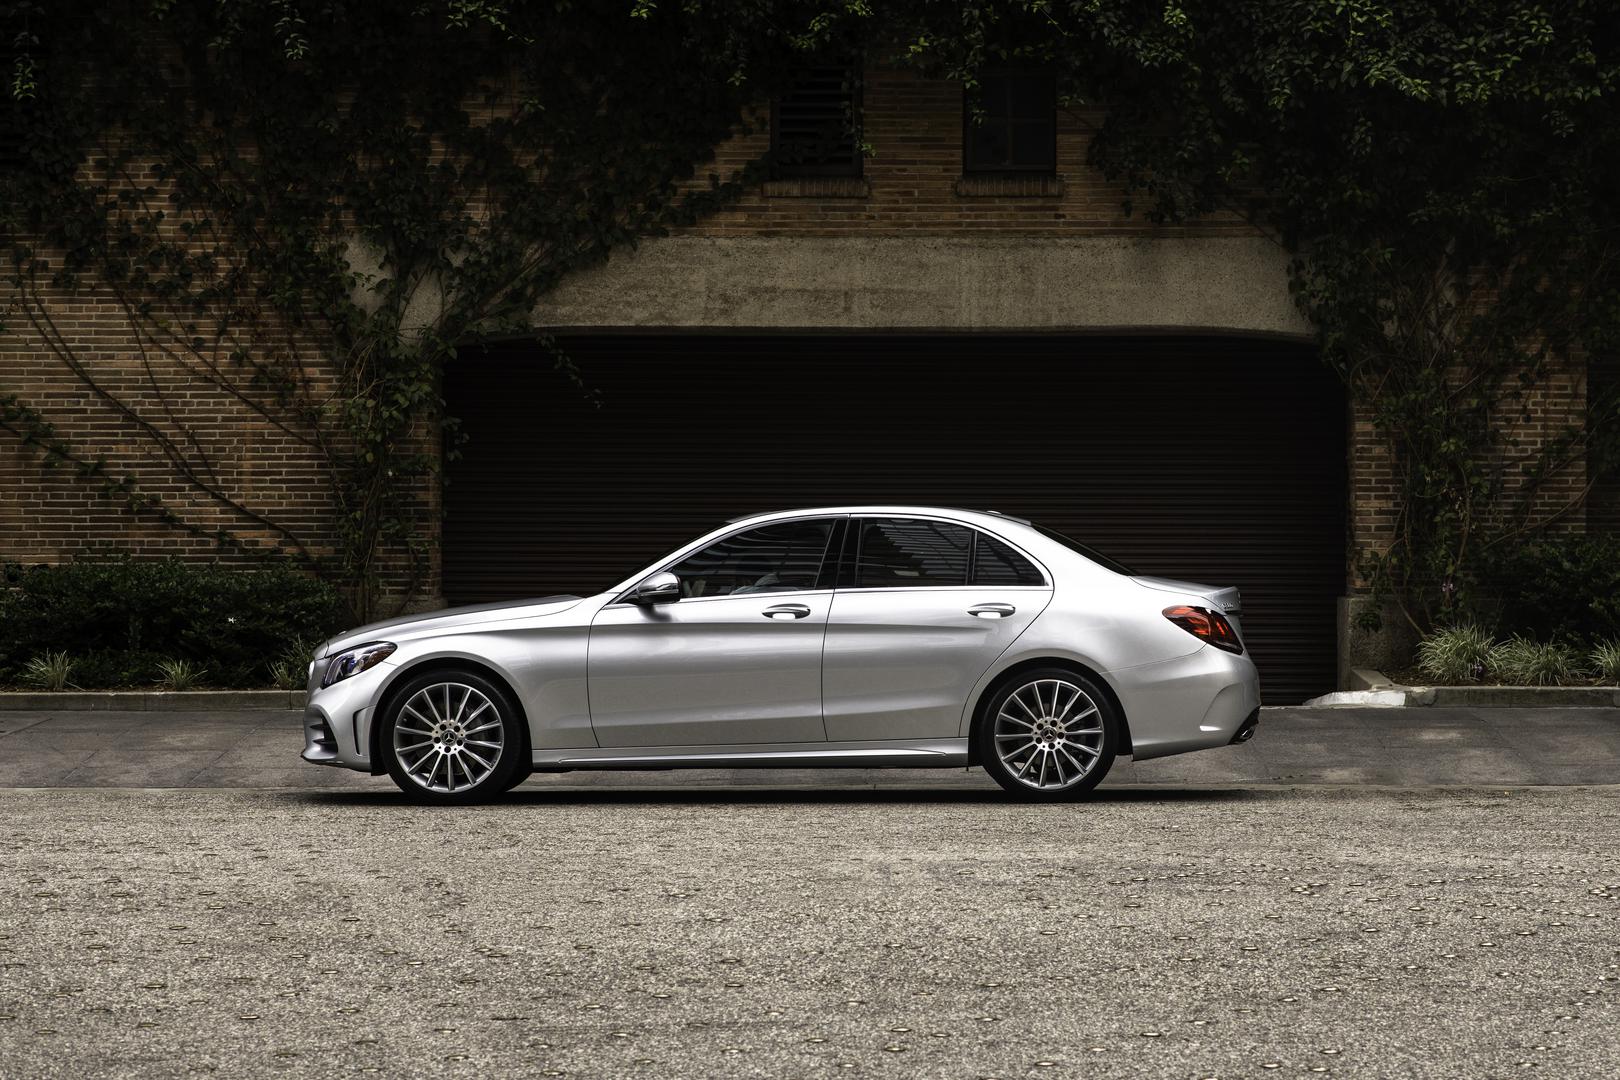 Lease a Mercedes-Benz in Wilsonville, OR